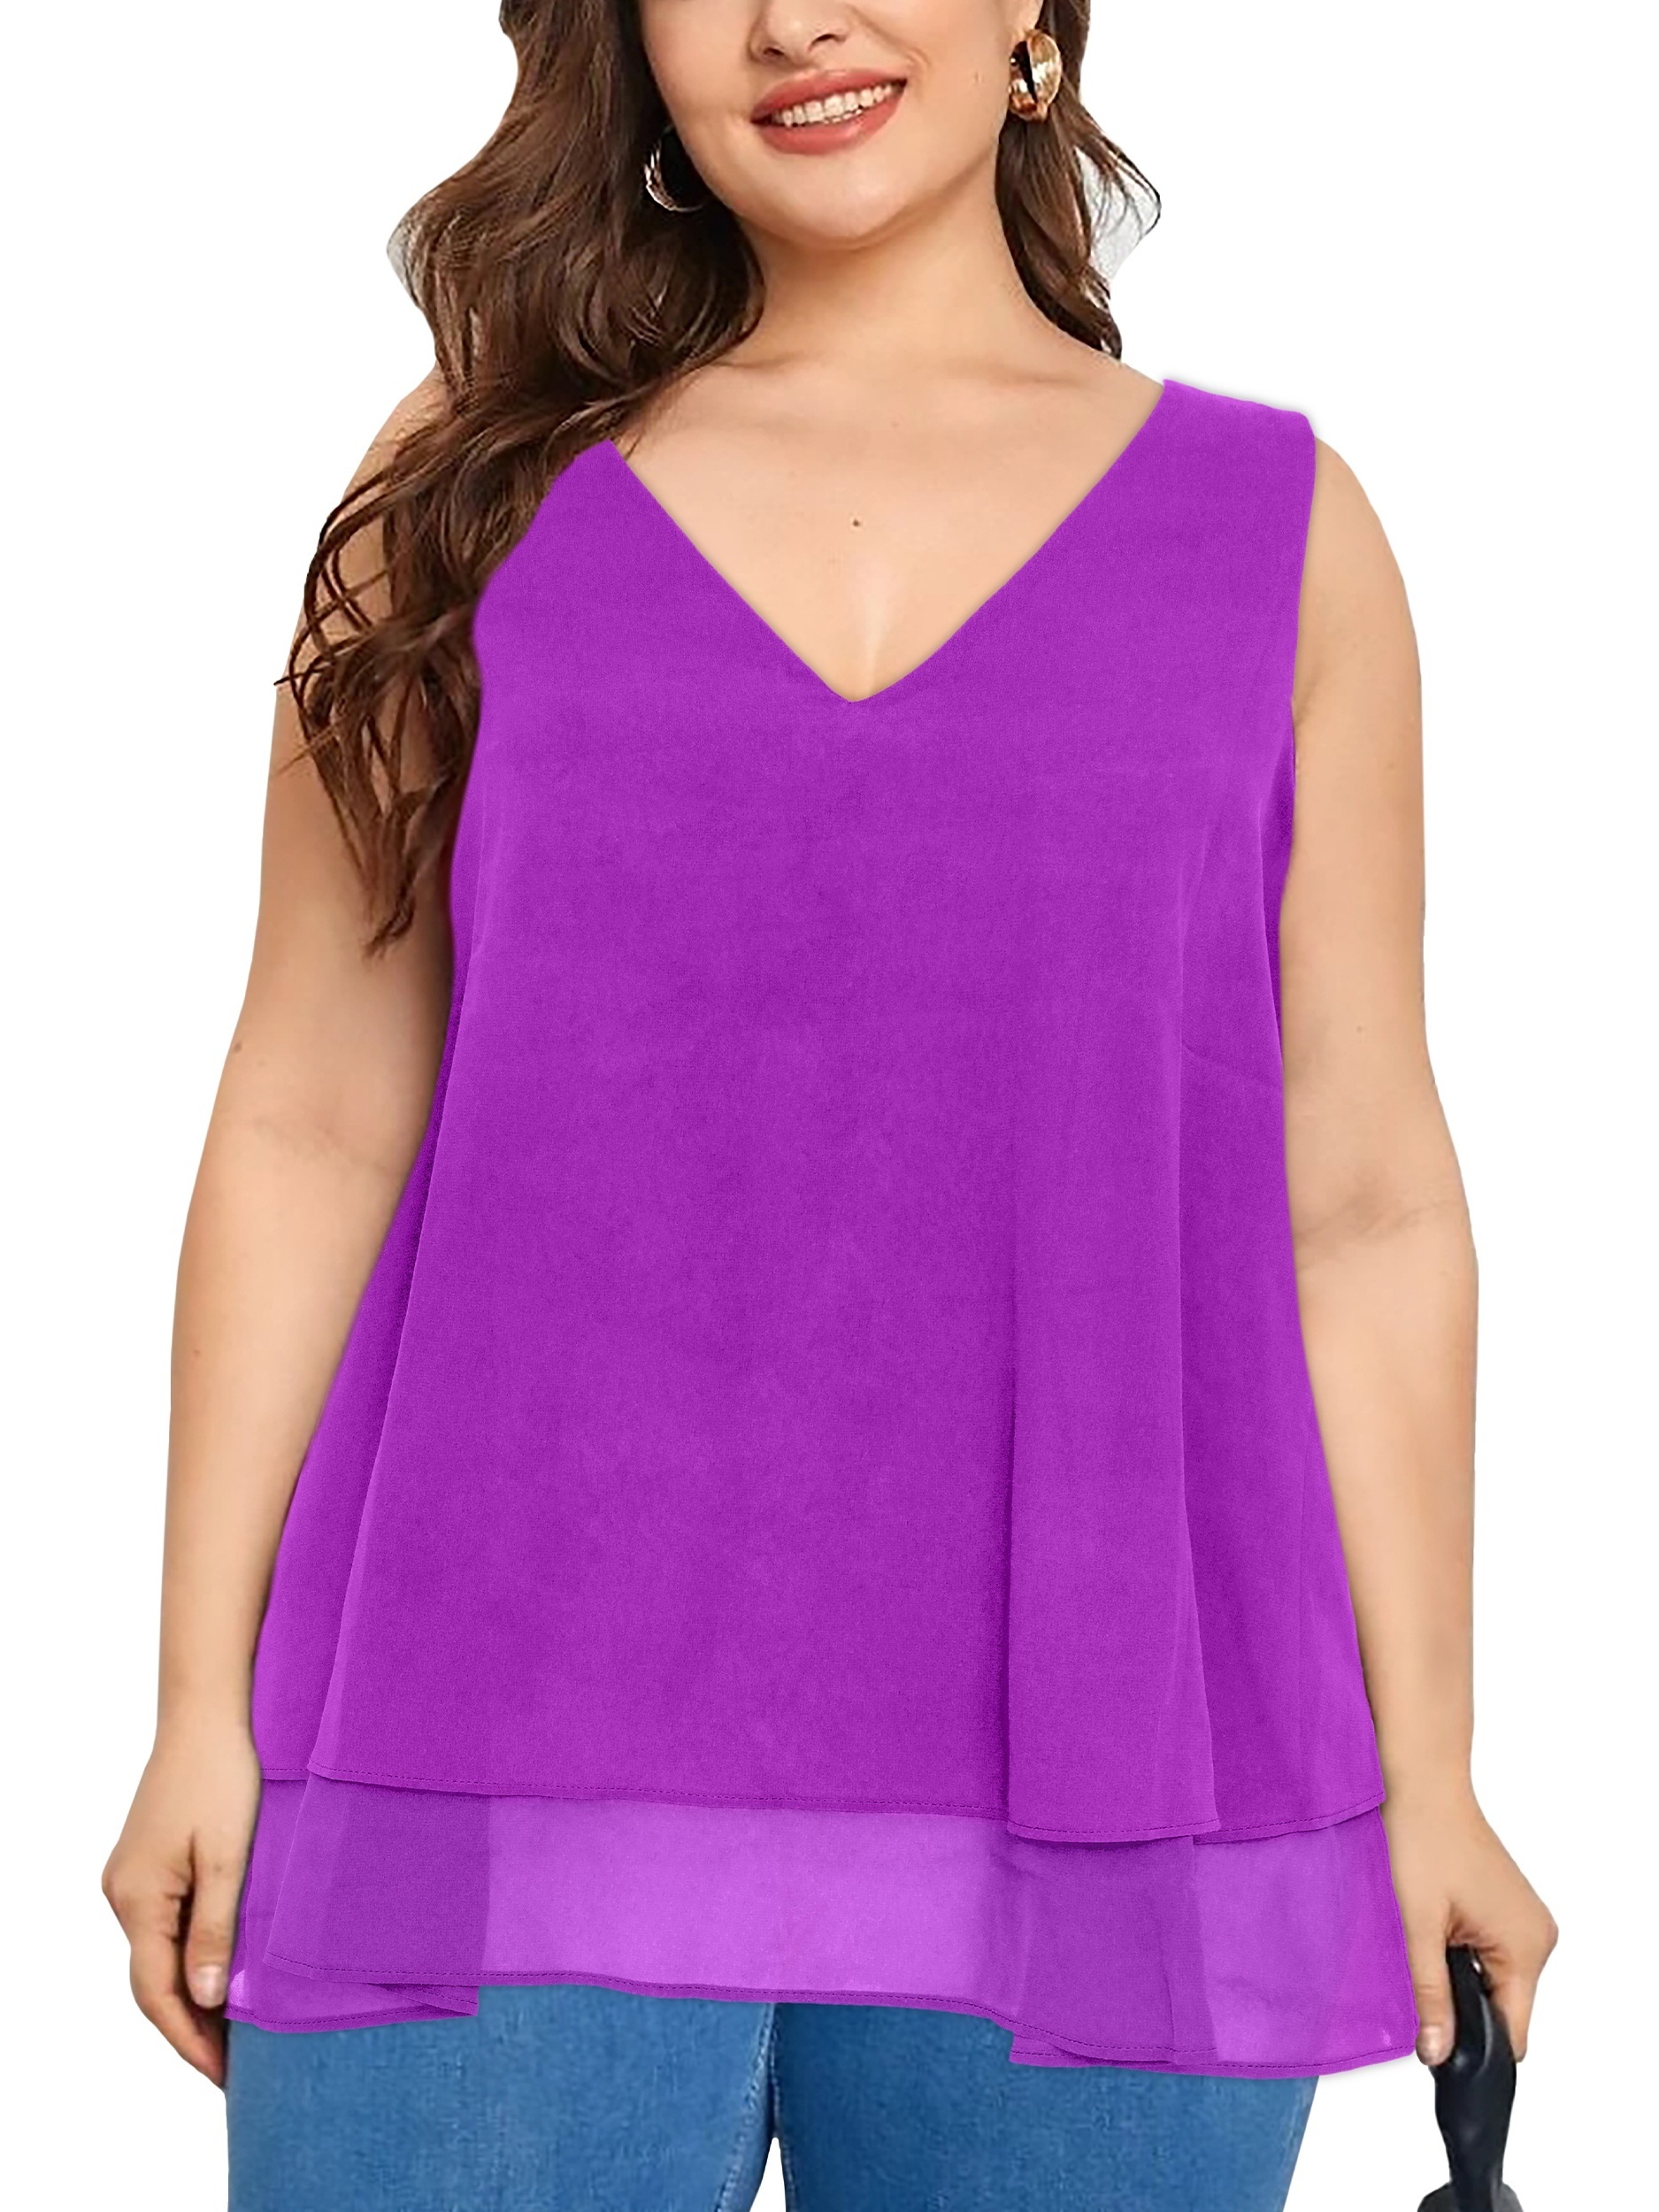  LUGOGNE Plus Size Tank Tops for Women Casual Vneck